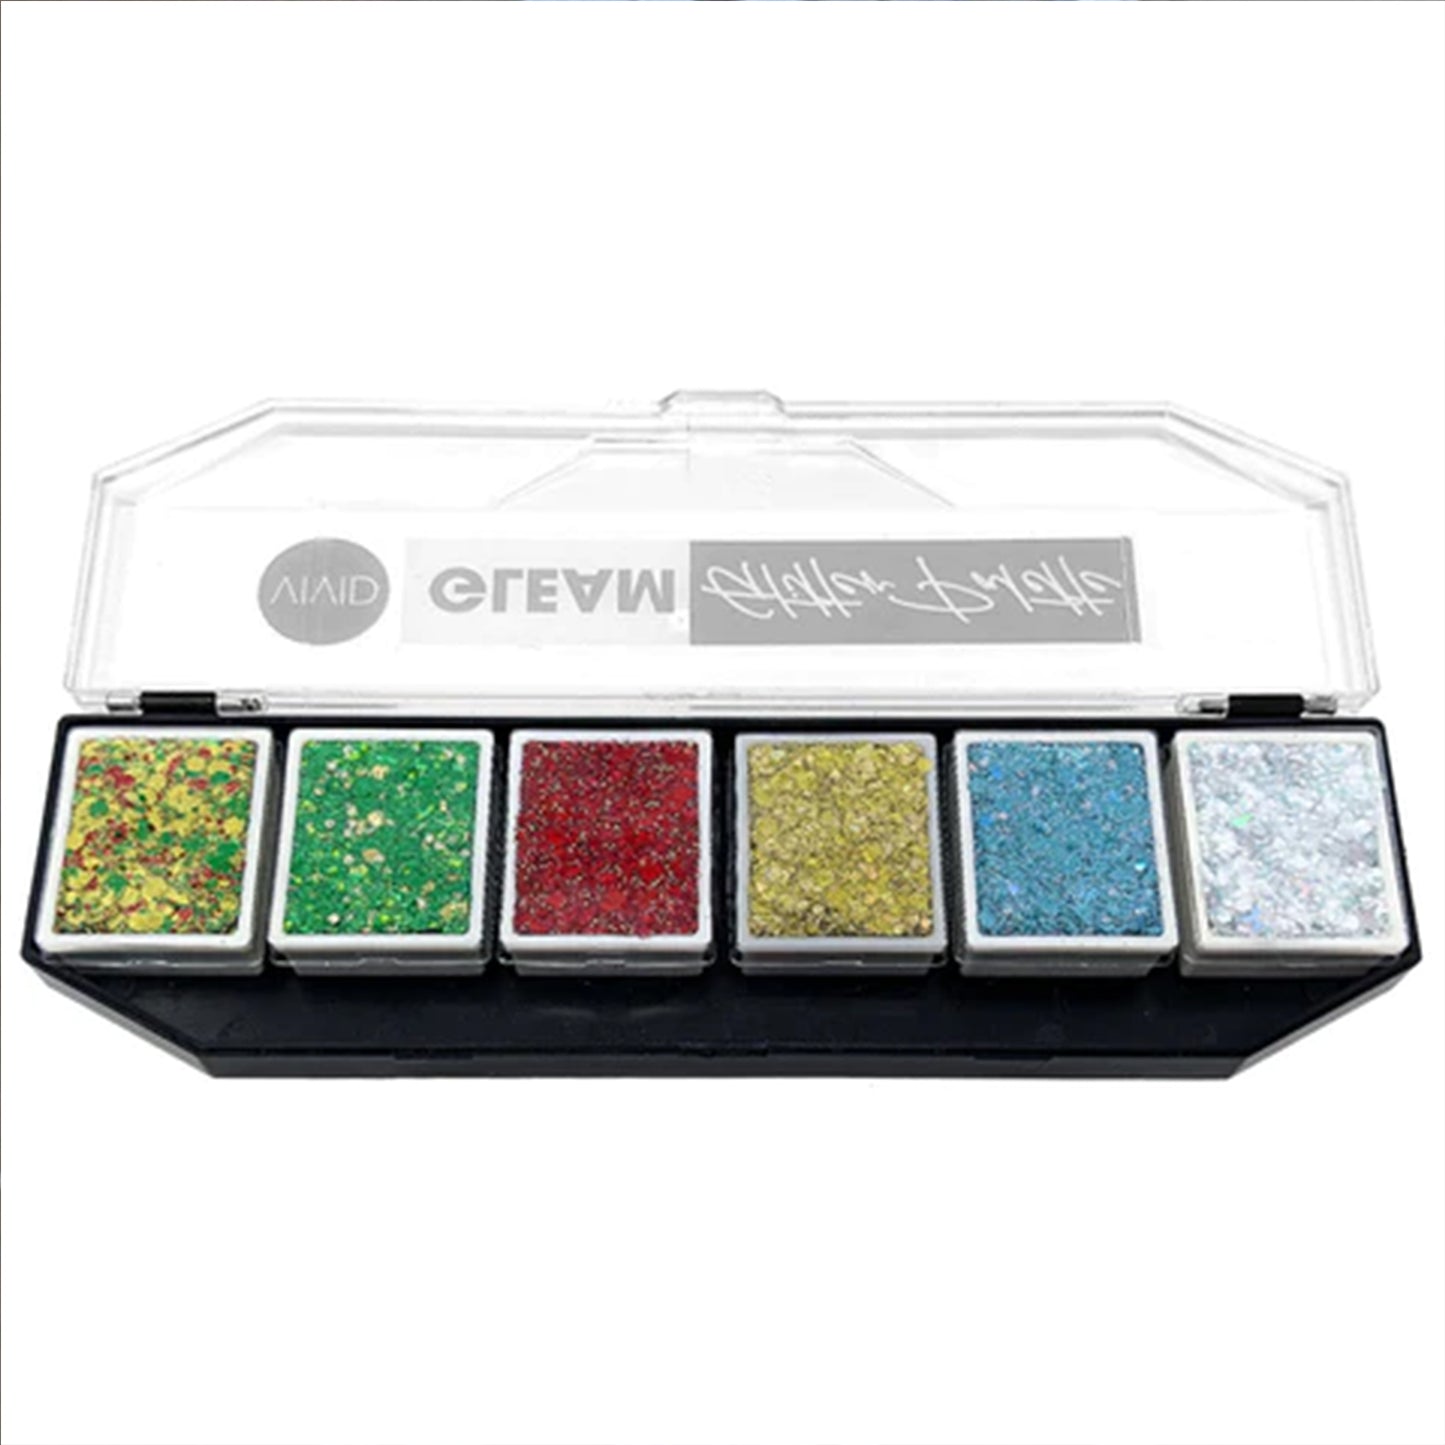 VIVID Gleam Glitter Cream Palette - Christmas Miracle (6 color) Limited Edition